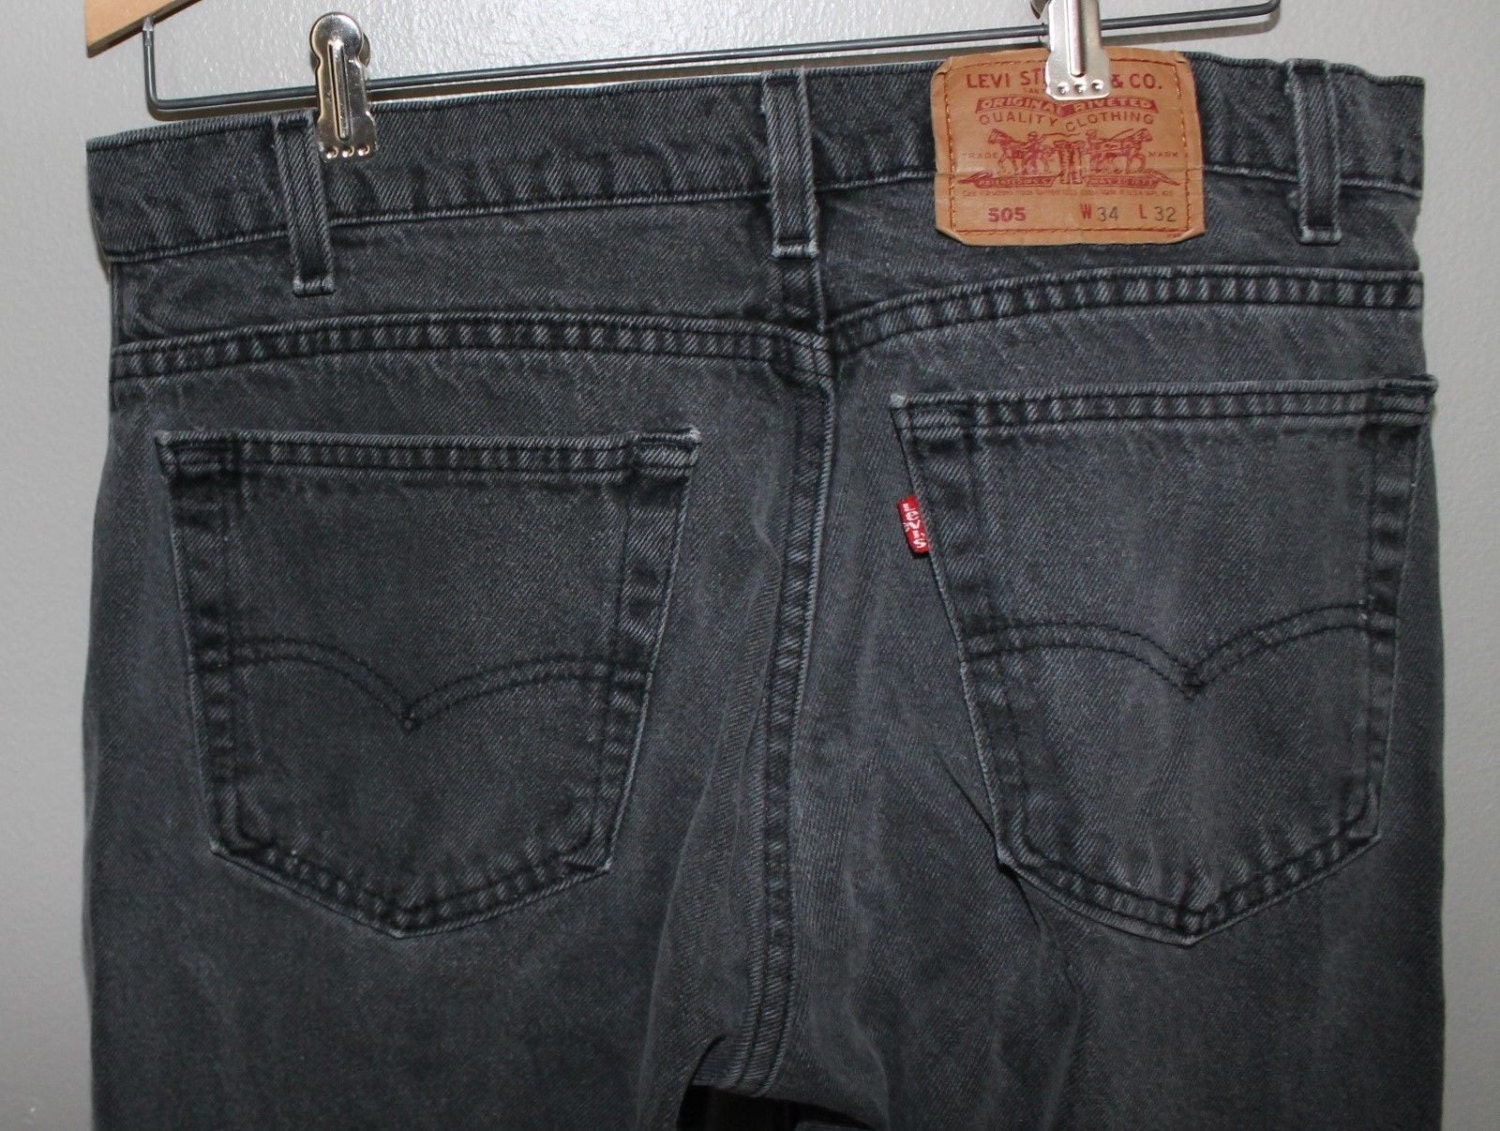 Vintage 90s 505 Red Tag Levi's Jeans Black Very Faded